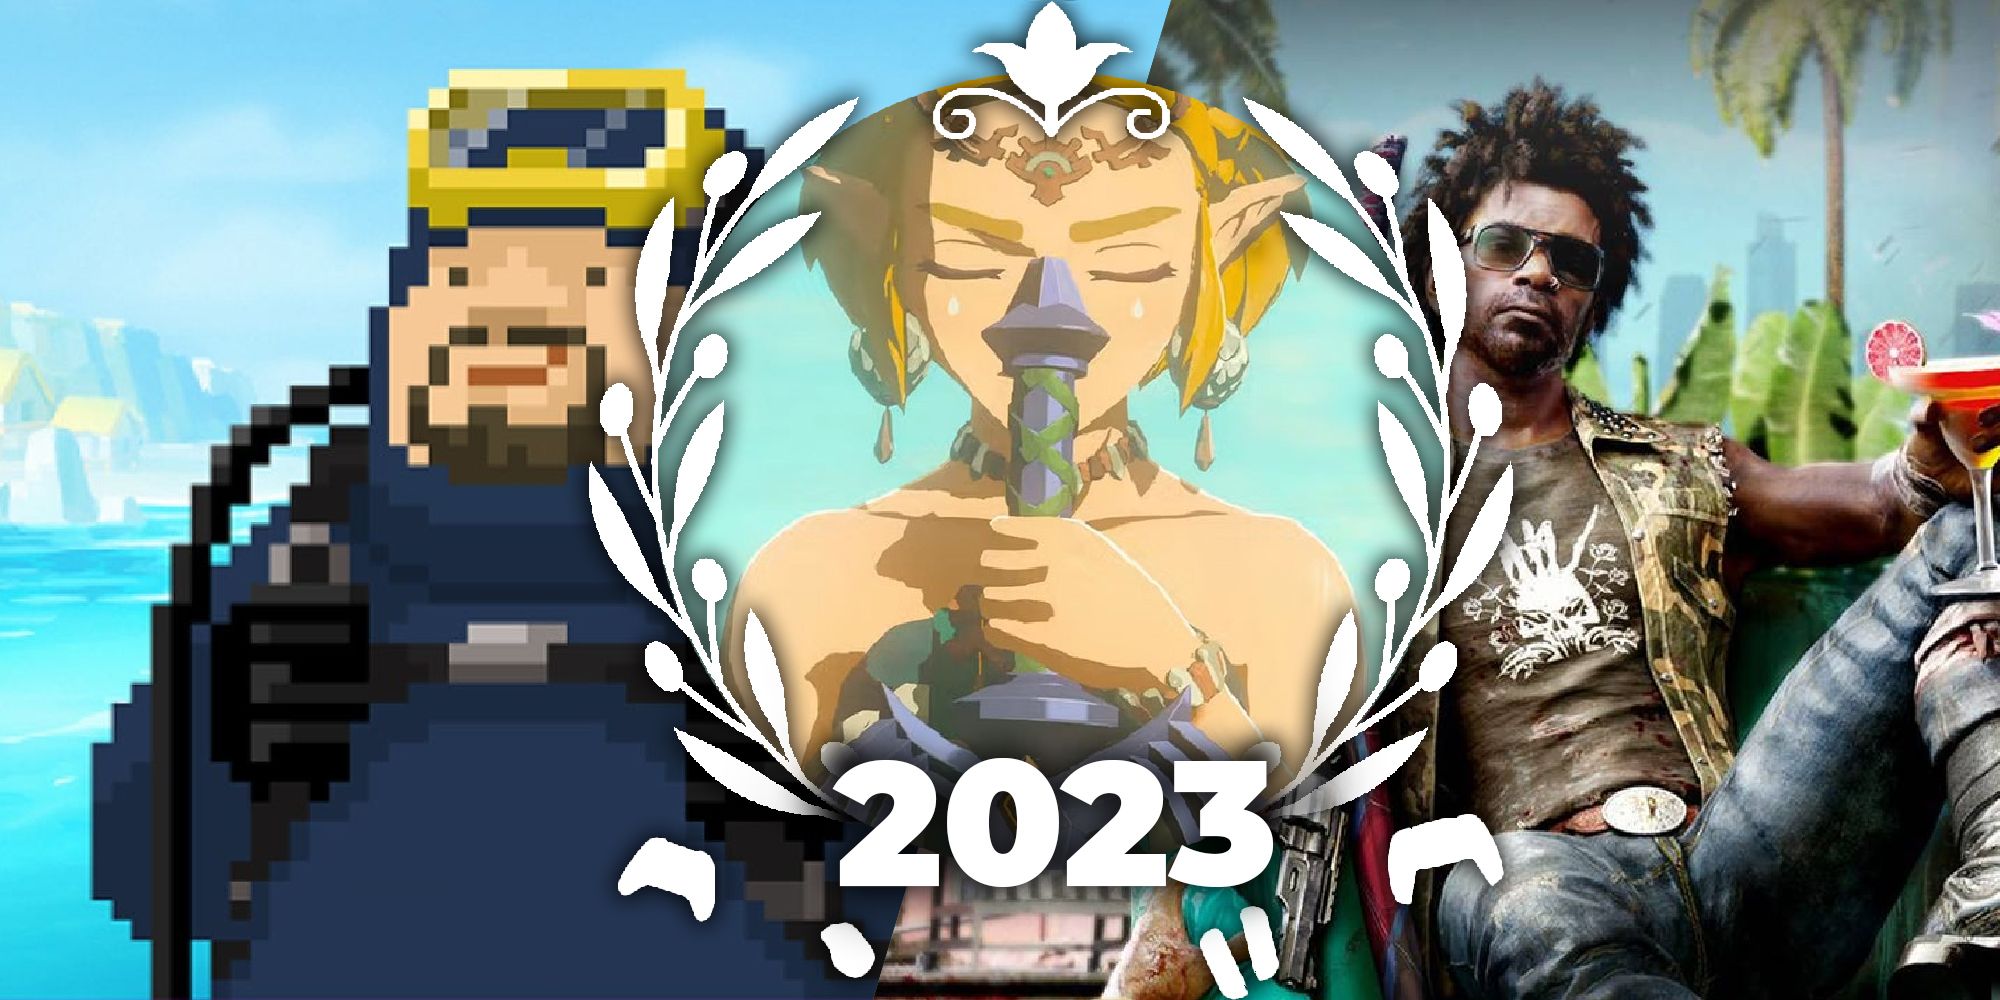 Vaspaan Dastoor Game of the Year 2023 featuring Dave the Diver, The Legend of Zelda Tears of the Kingdom, and Dead Island 2